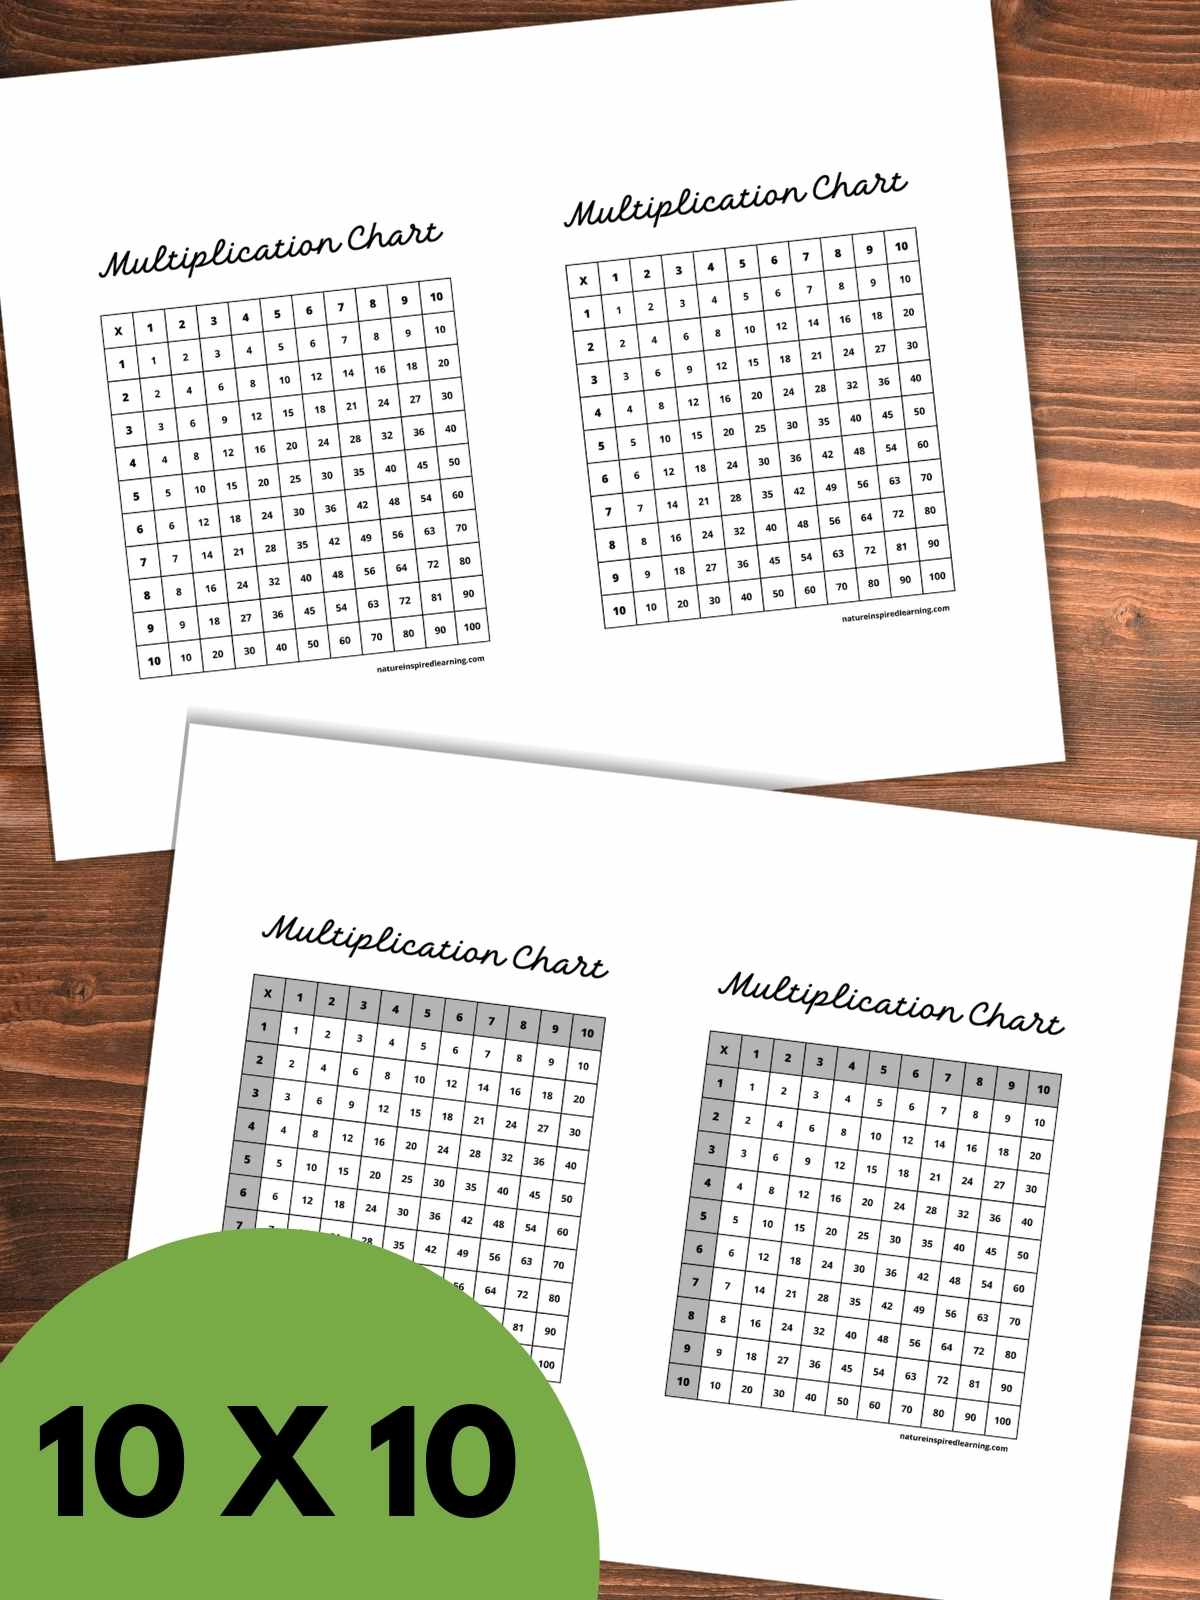 Two printables with two 10 by 10 multiplication grids on each overlapping on a wooden background. Green half circle with text overlay bottom left corner